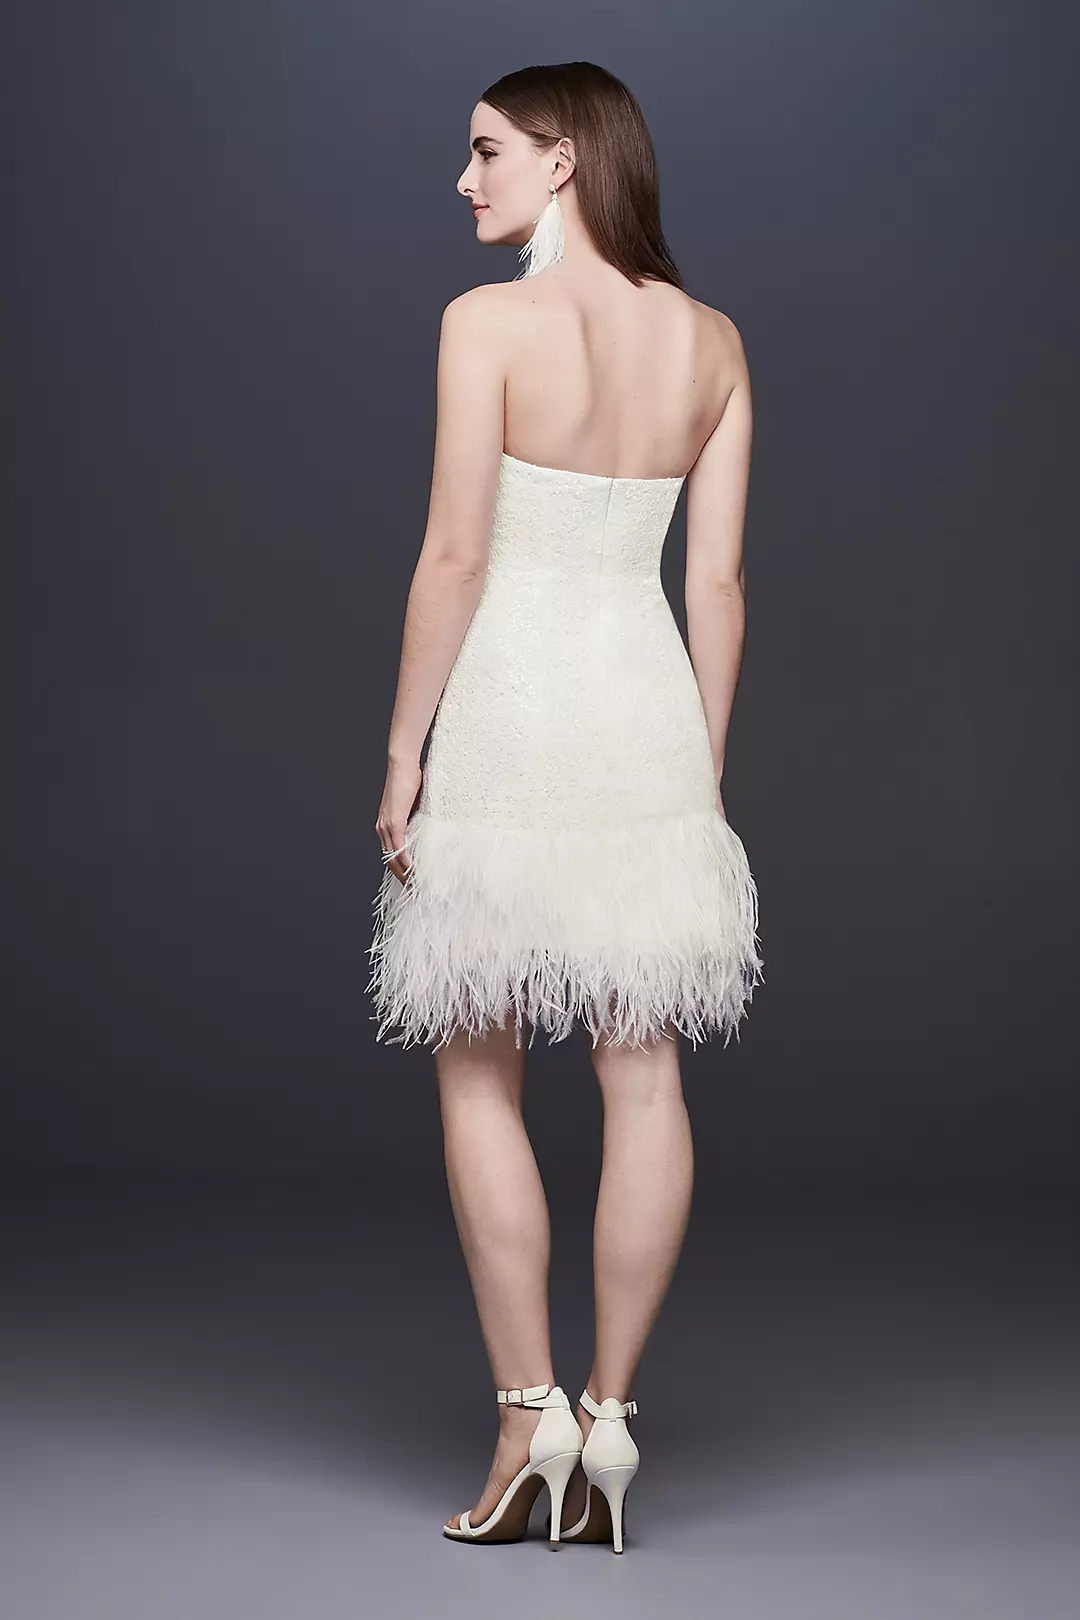 Strapless Lace Wedding Dress with Ostrich Feathers Image 2